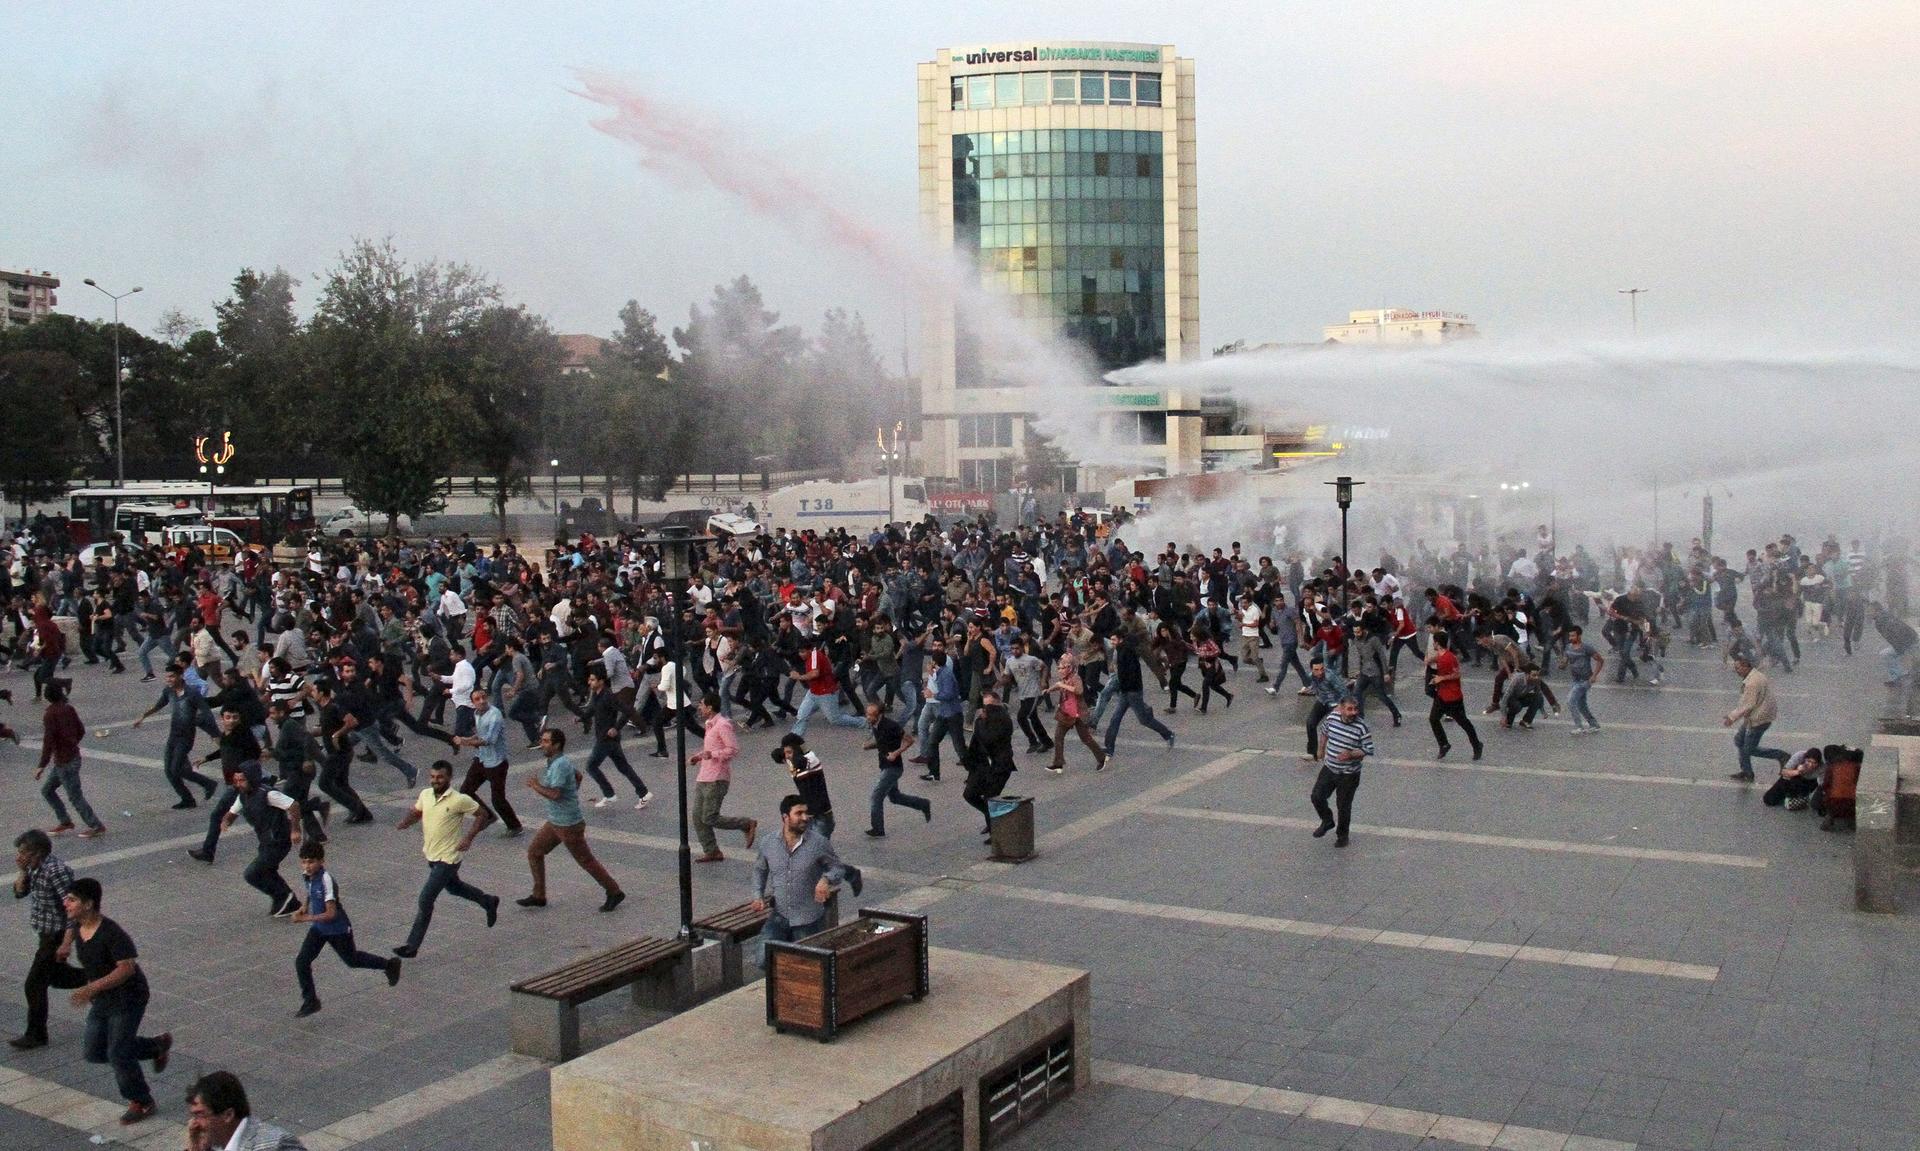 Police in Diyarbakir, Turkey, on October 11, 2015 use tear gas and water cannon to disperse people marching to protest the double suicide bombing in Ankara that killed up to 128 people.